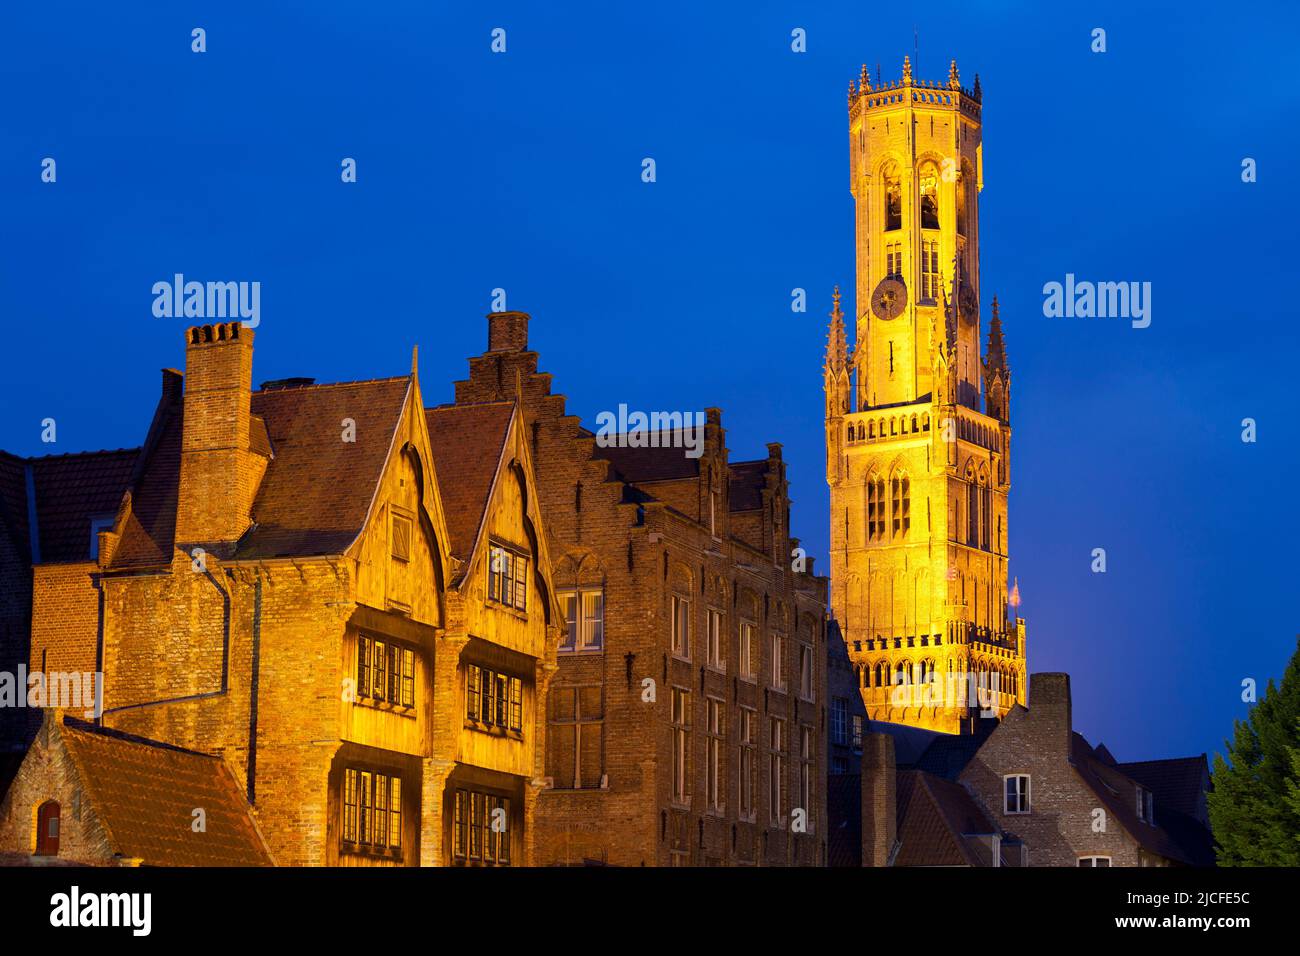 The Bruges Belfry (Belfort Tower) and Buildngs lit up at Night in the Historic Center of Bruges, Belgium Stock Photo